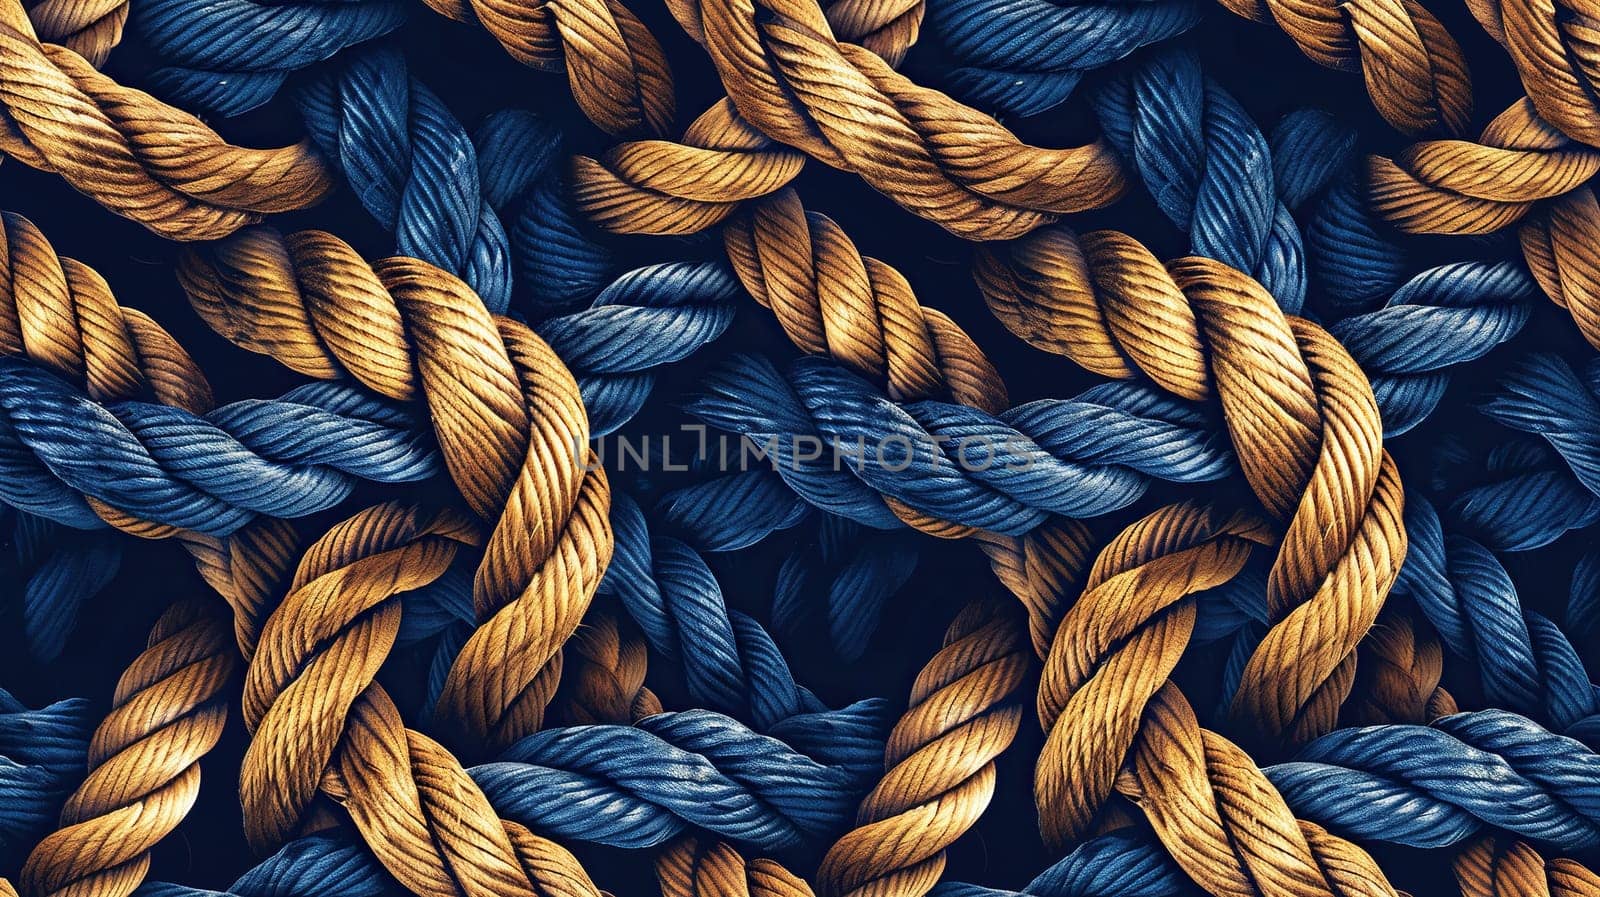 Horizontal background with rope texture. Interweaving blue and brown ropes. Generated by artificial intelligence by Vovmar